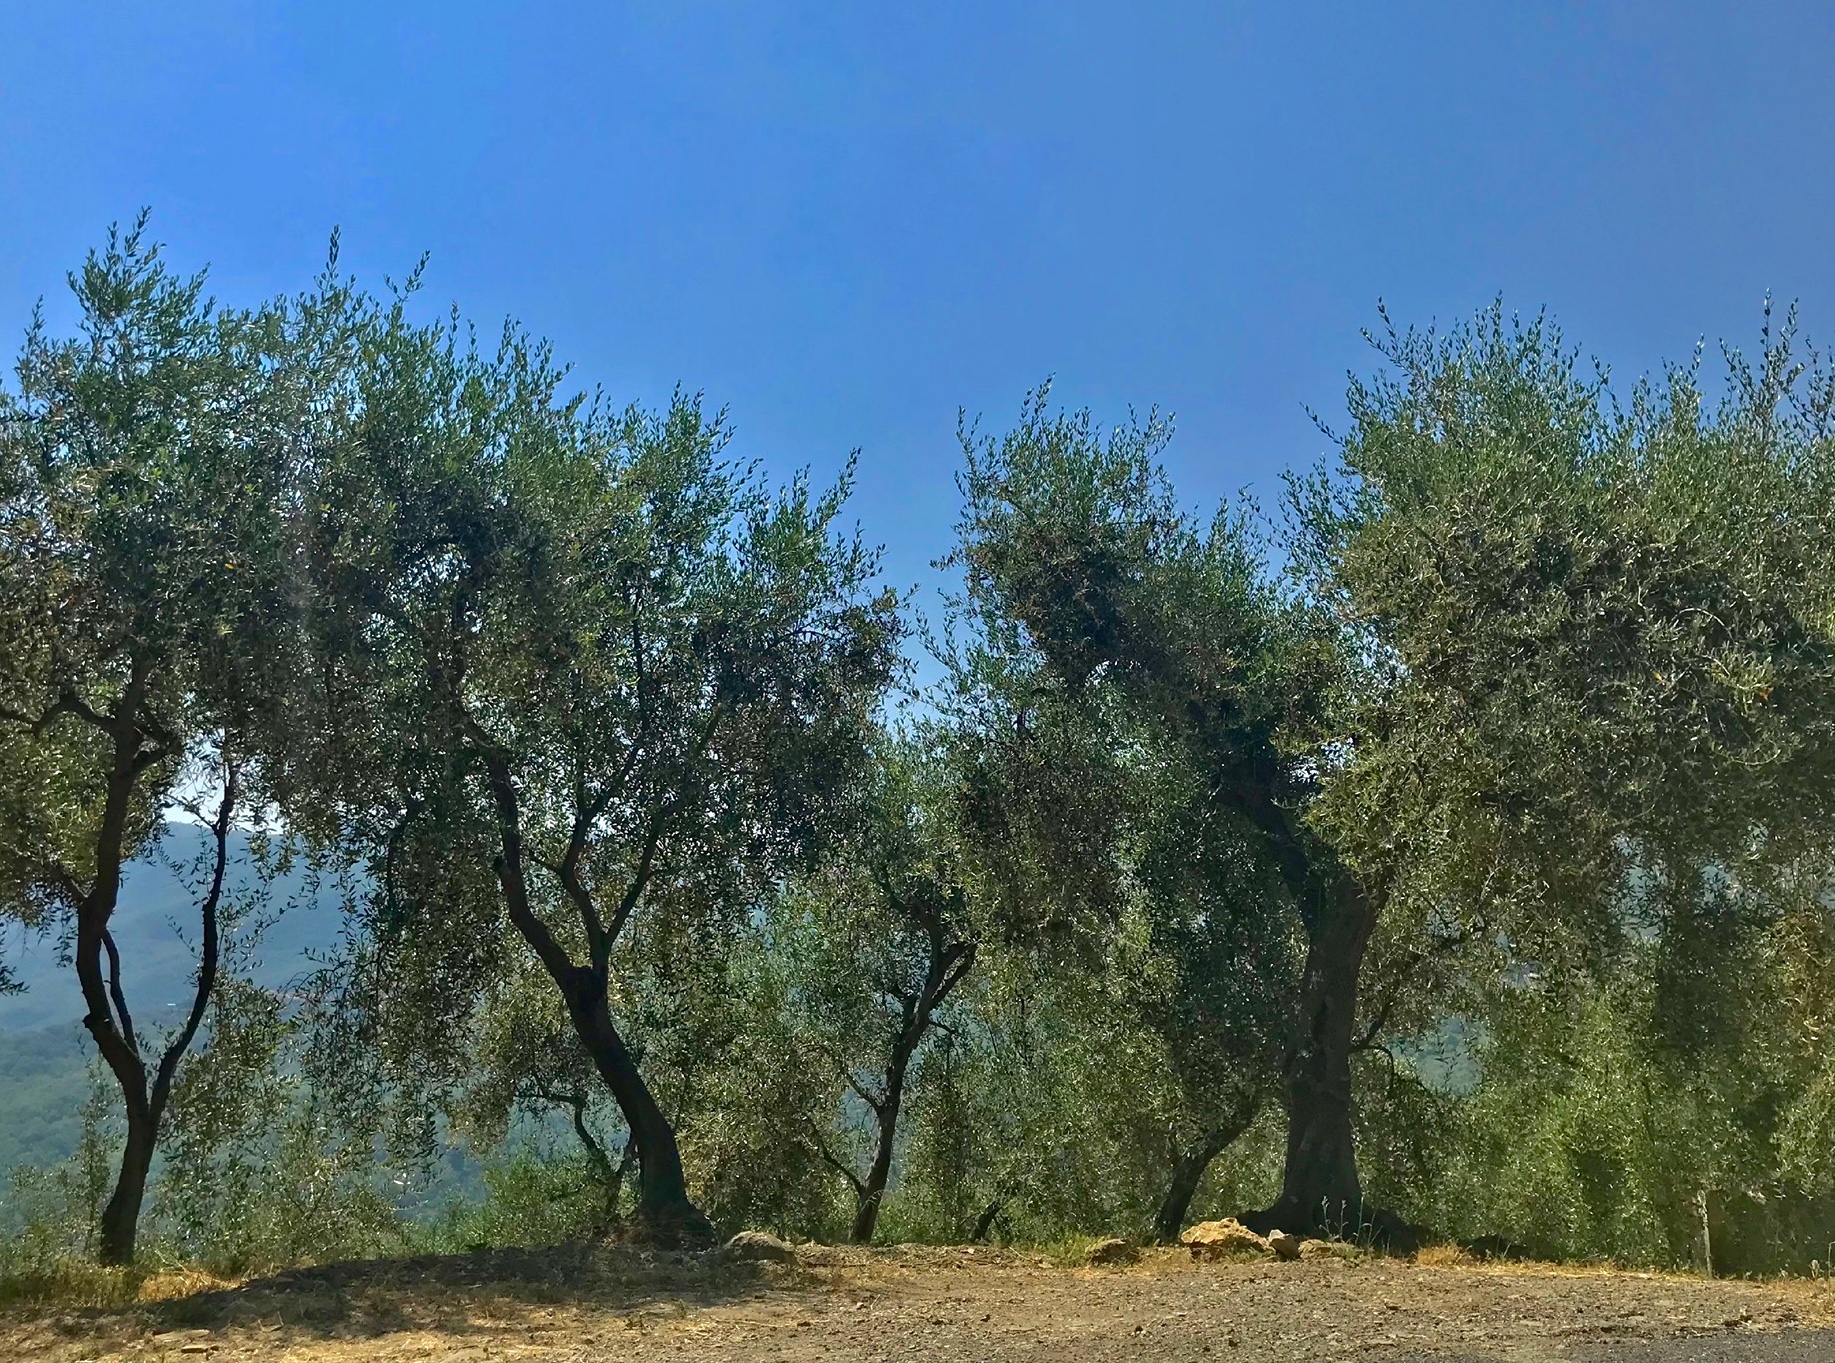 A Walk among the Olive Trees